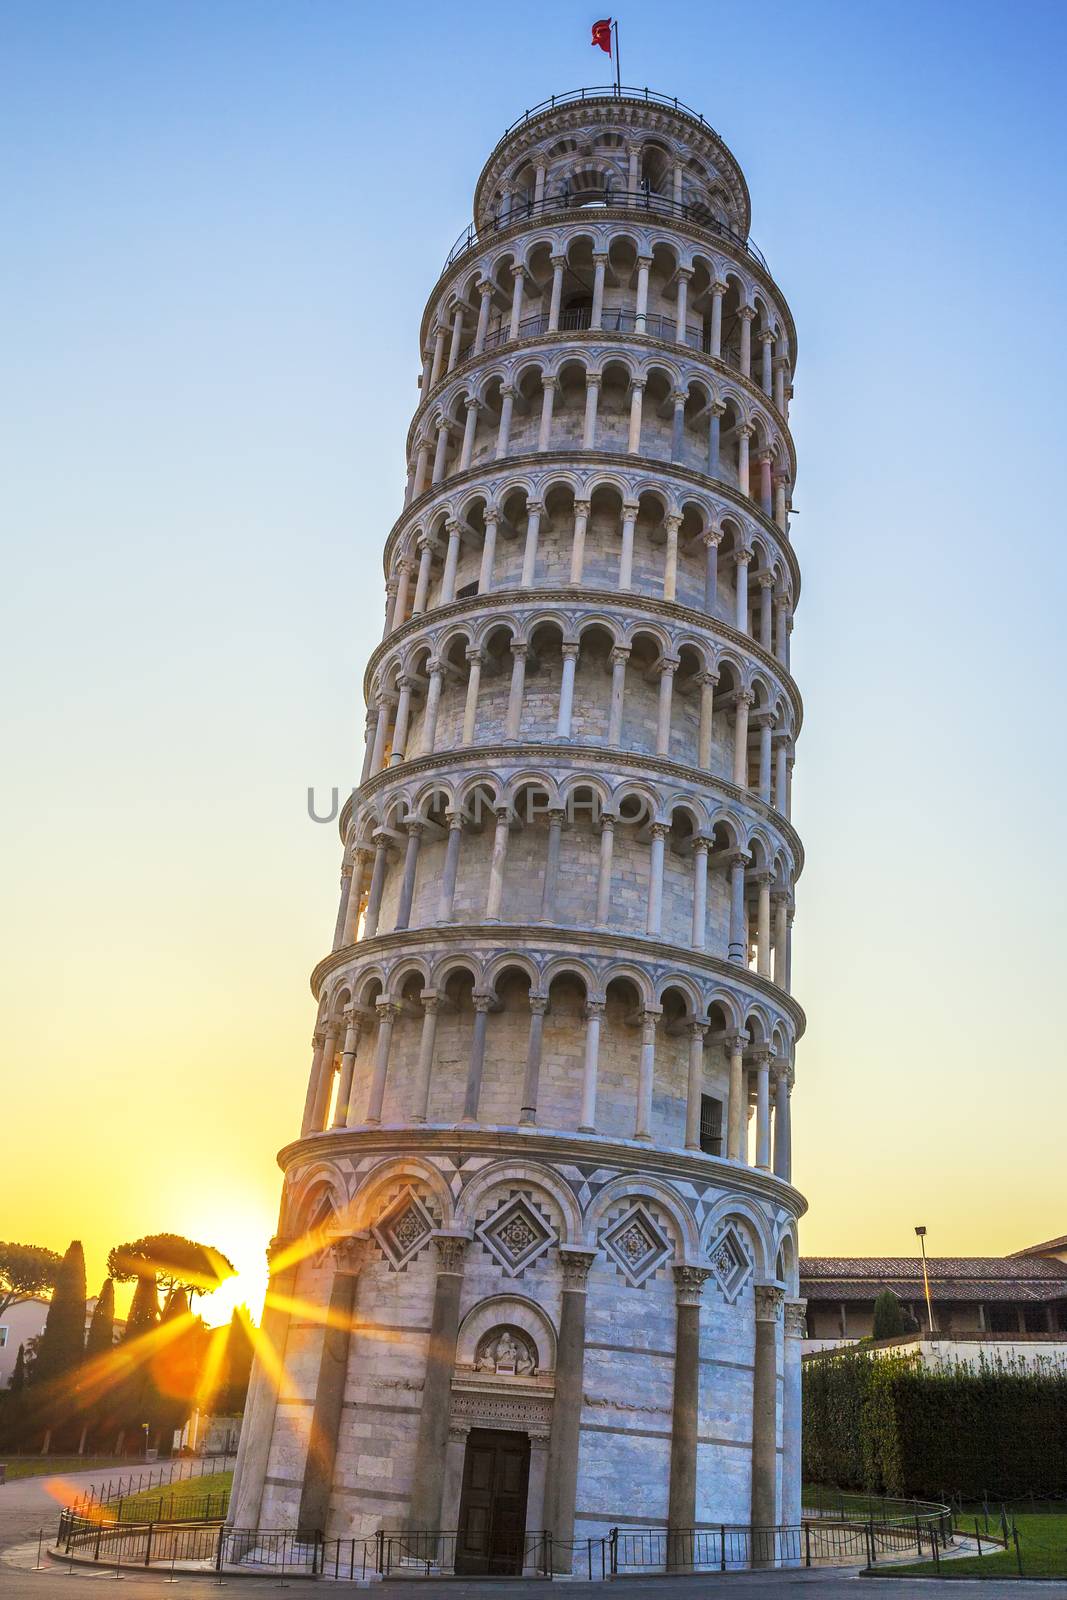 Famous Pisa leaning tower at sunrise by vwalakte